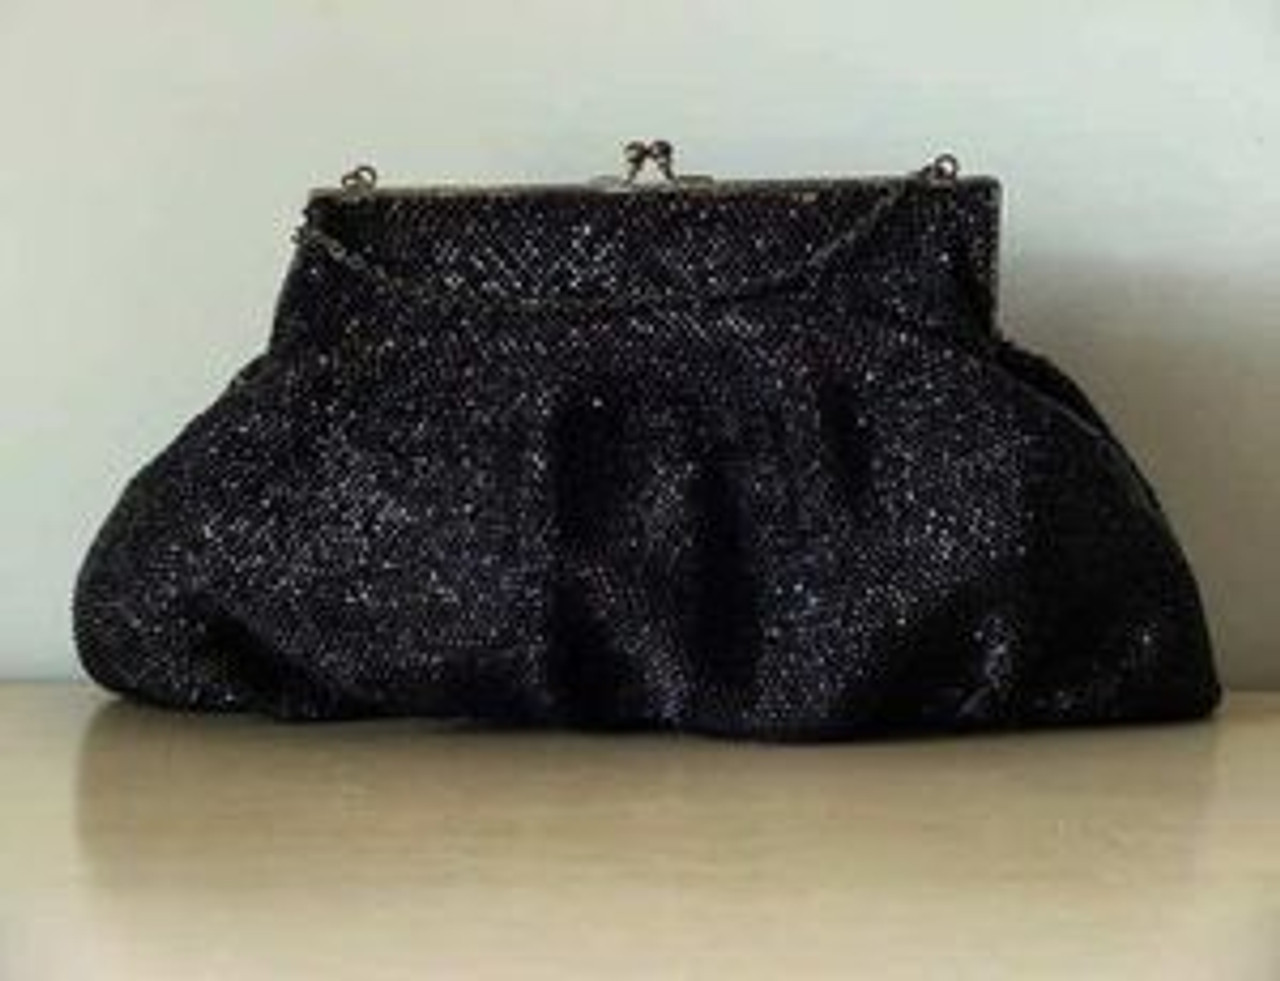 GORGEOUS 1920s Art Deco FRENCH Beaded Purse Evening Bag,Shimmering